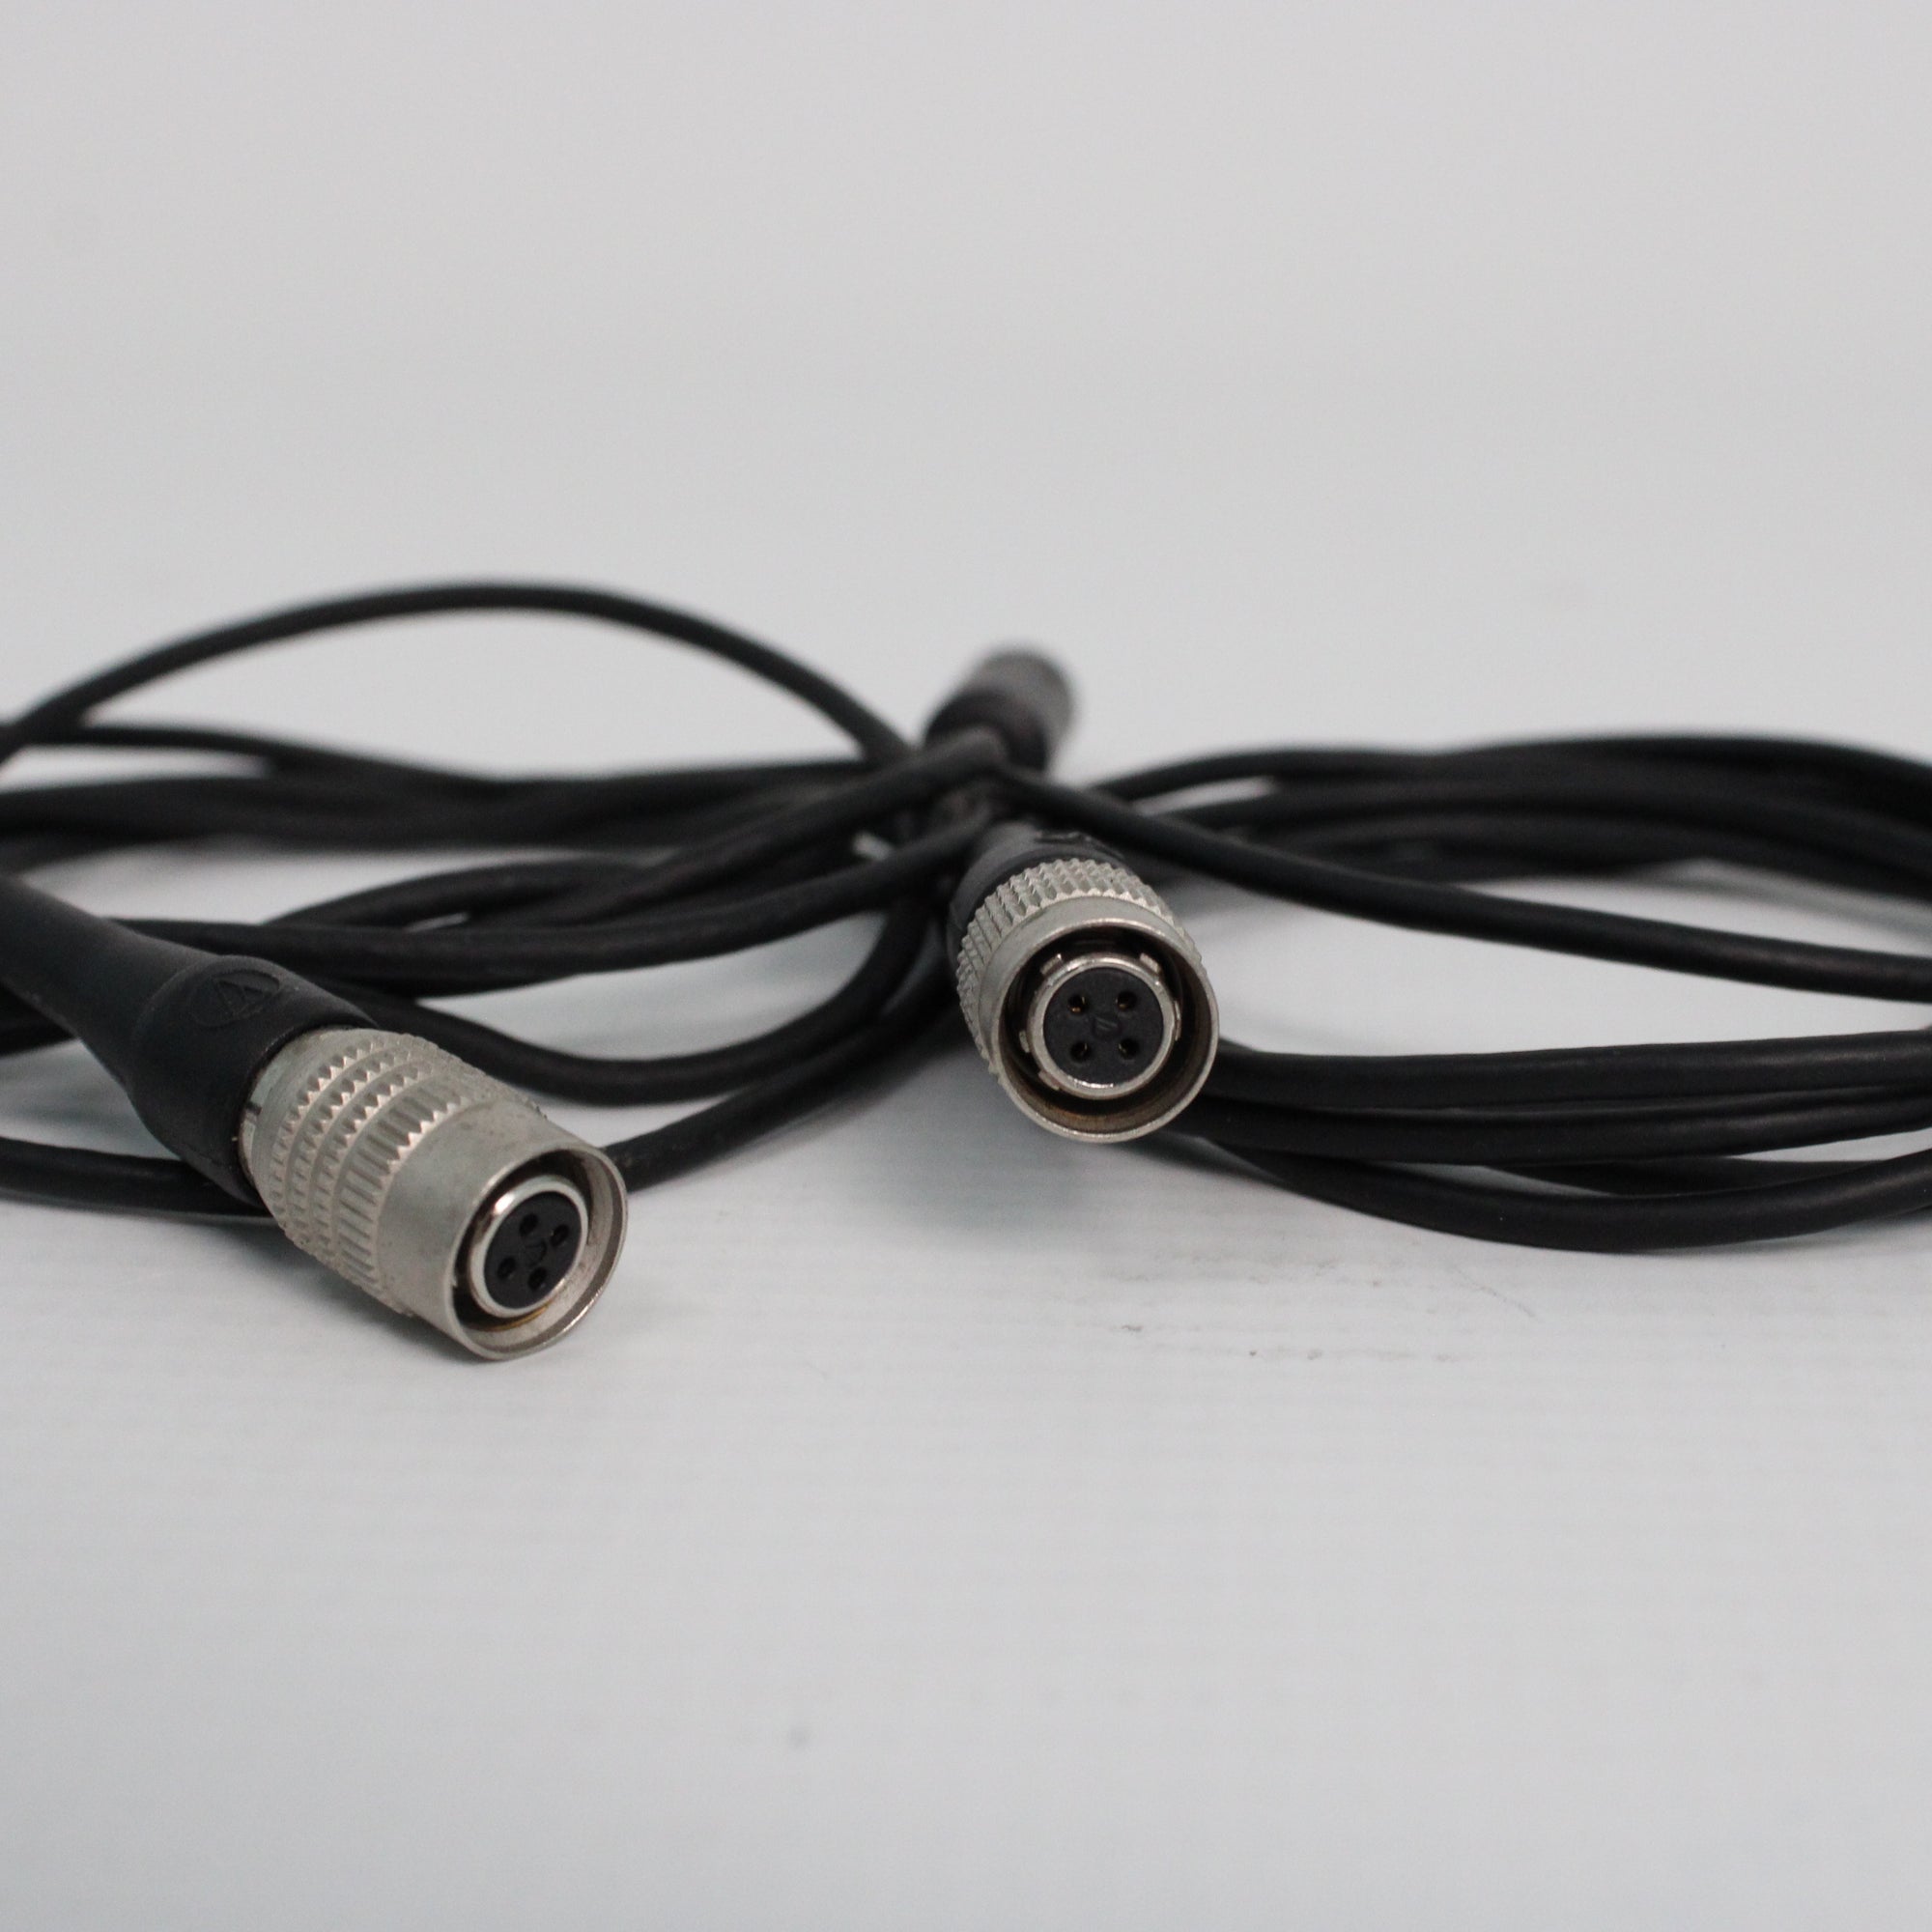 USED Audio Technica AT831cW Lapel Microphones x2 Close-up on connector ends